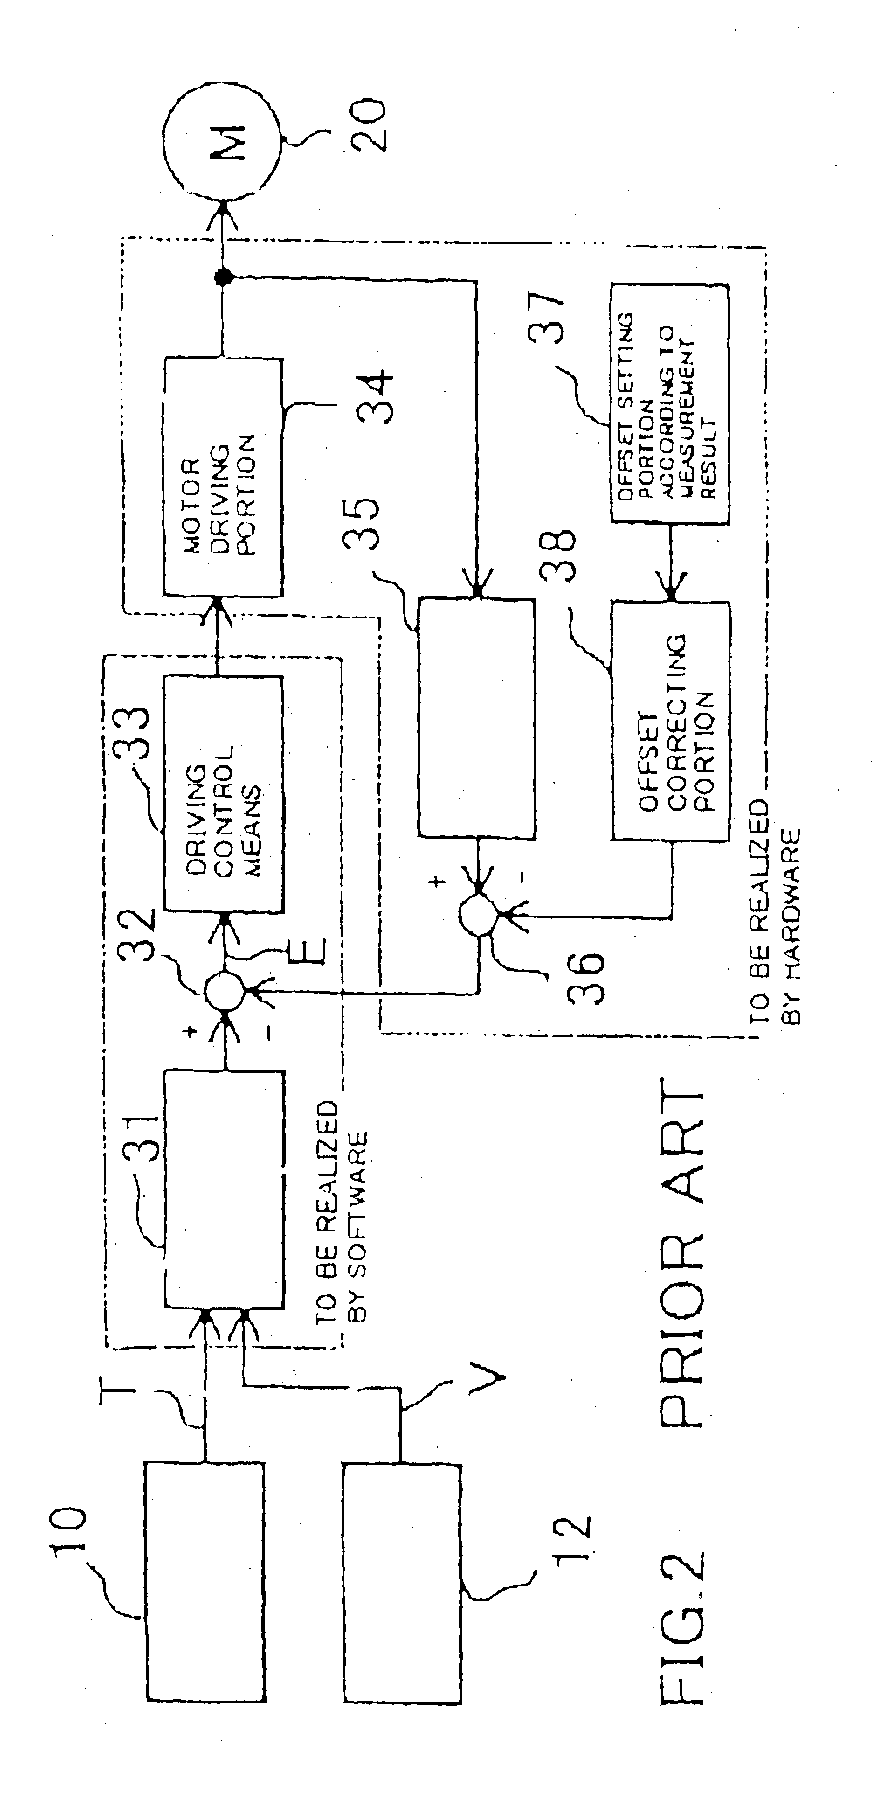 Controller for electric power steering system